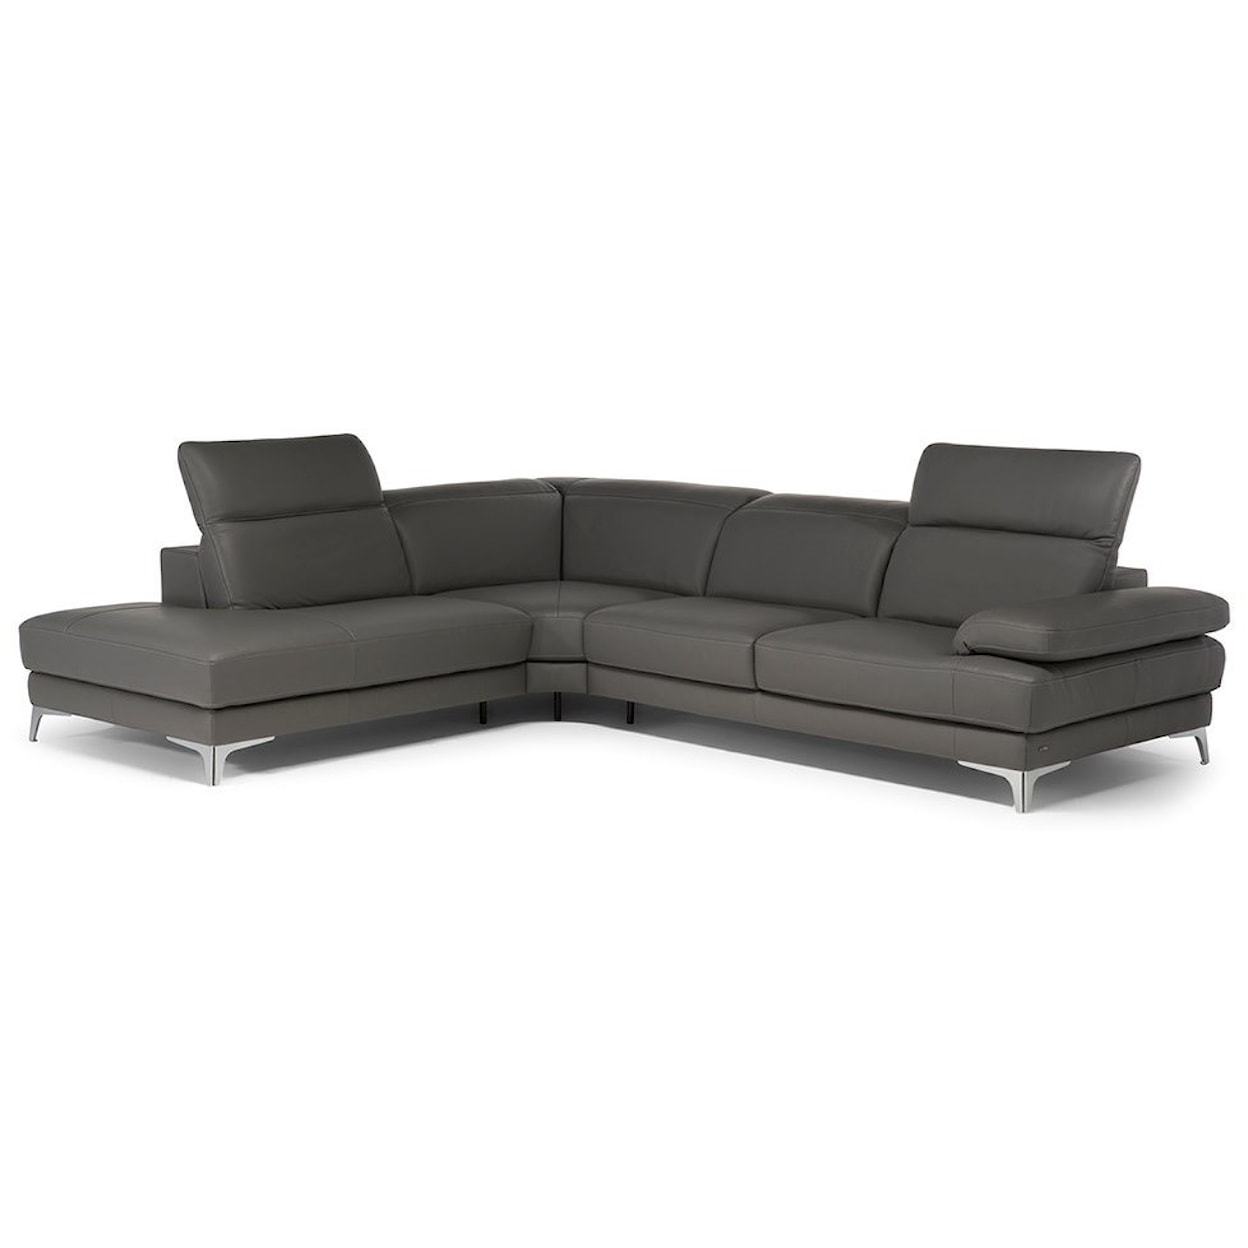 Natuzzi Editions Speranza 3 Piece Sectional with LAF Chaise